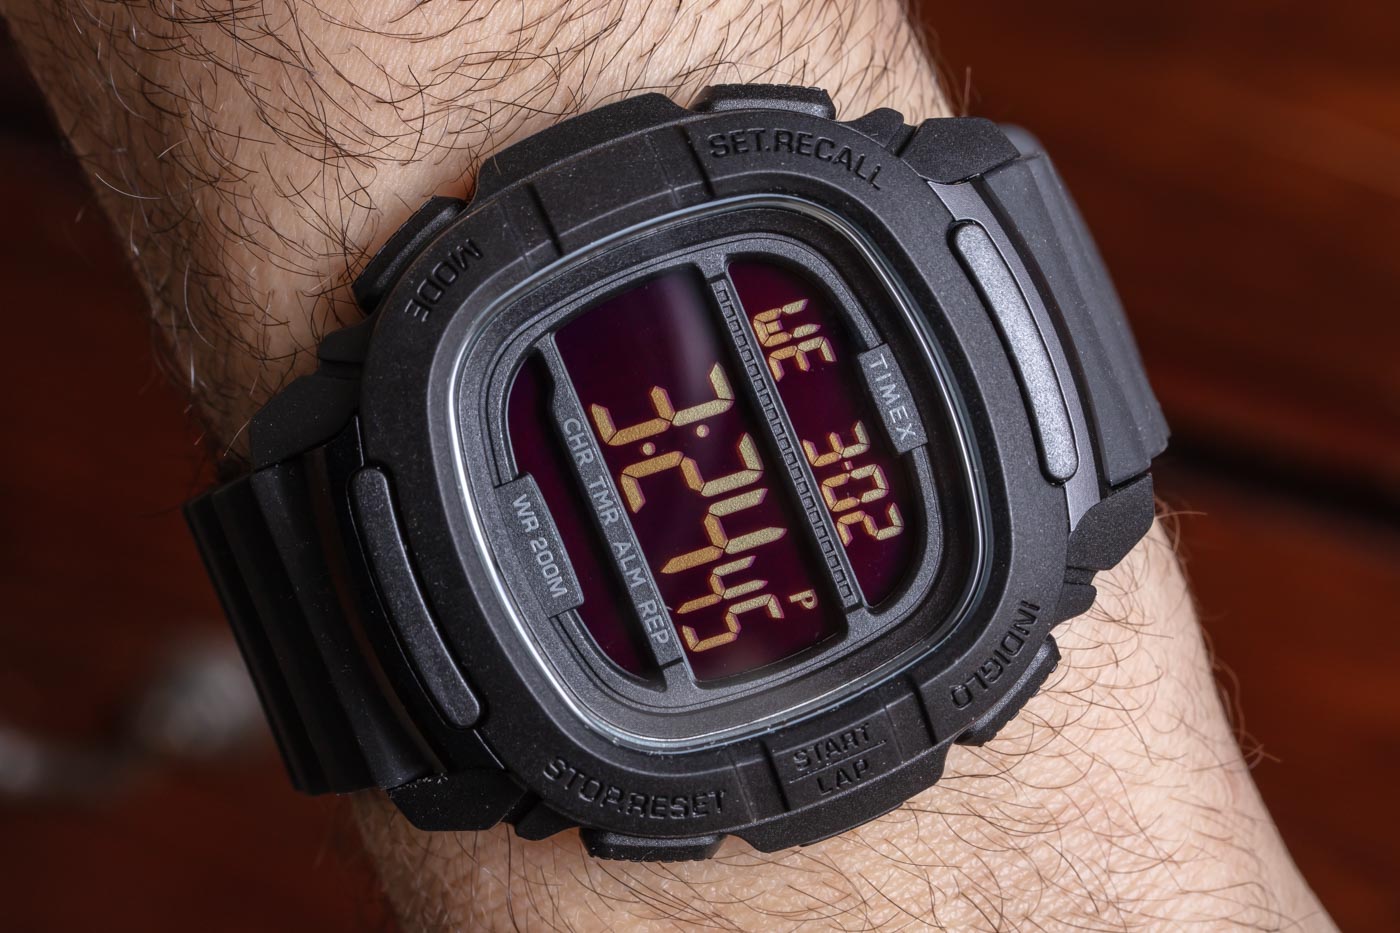 Timex Command 47 Digital Sports Watches Hands-On | aBlogtoWatch